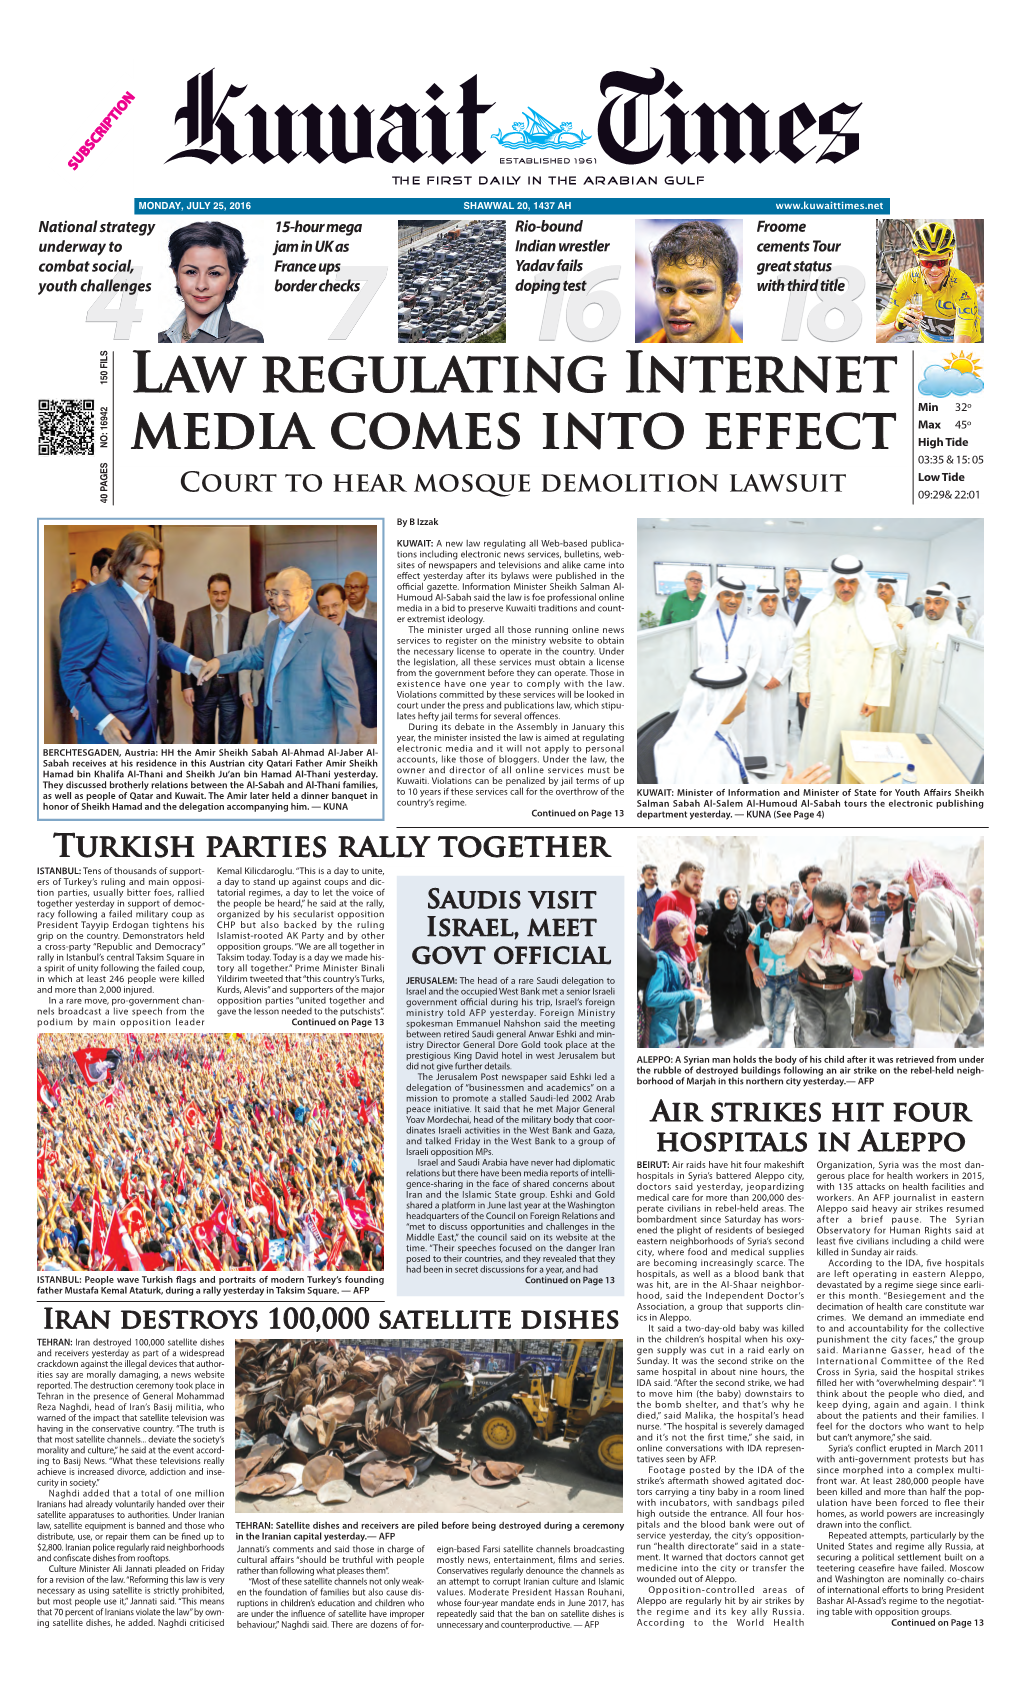 Law Regulating Internet Media Comes Into Effect